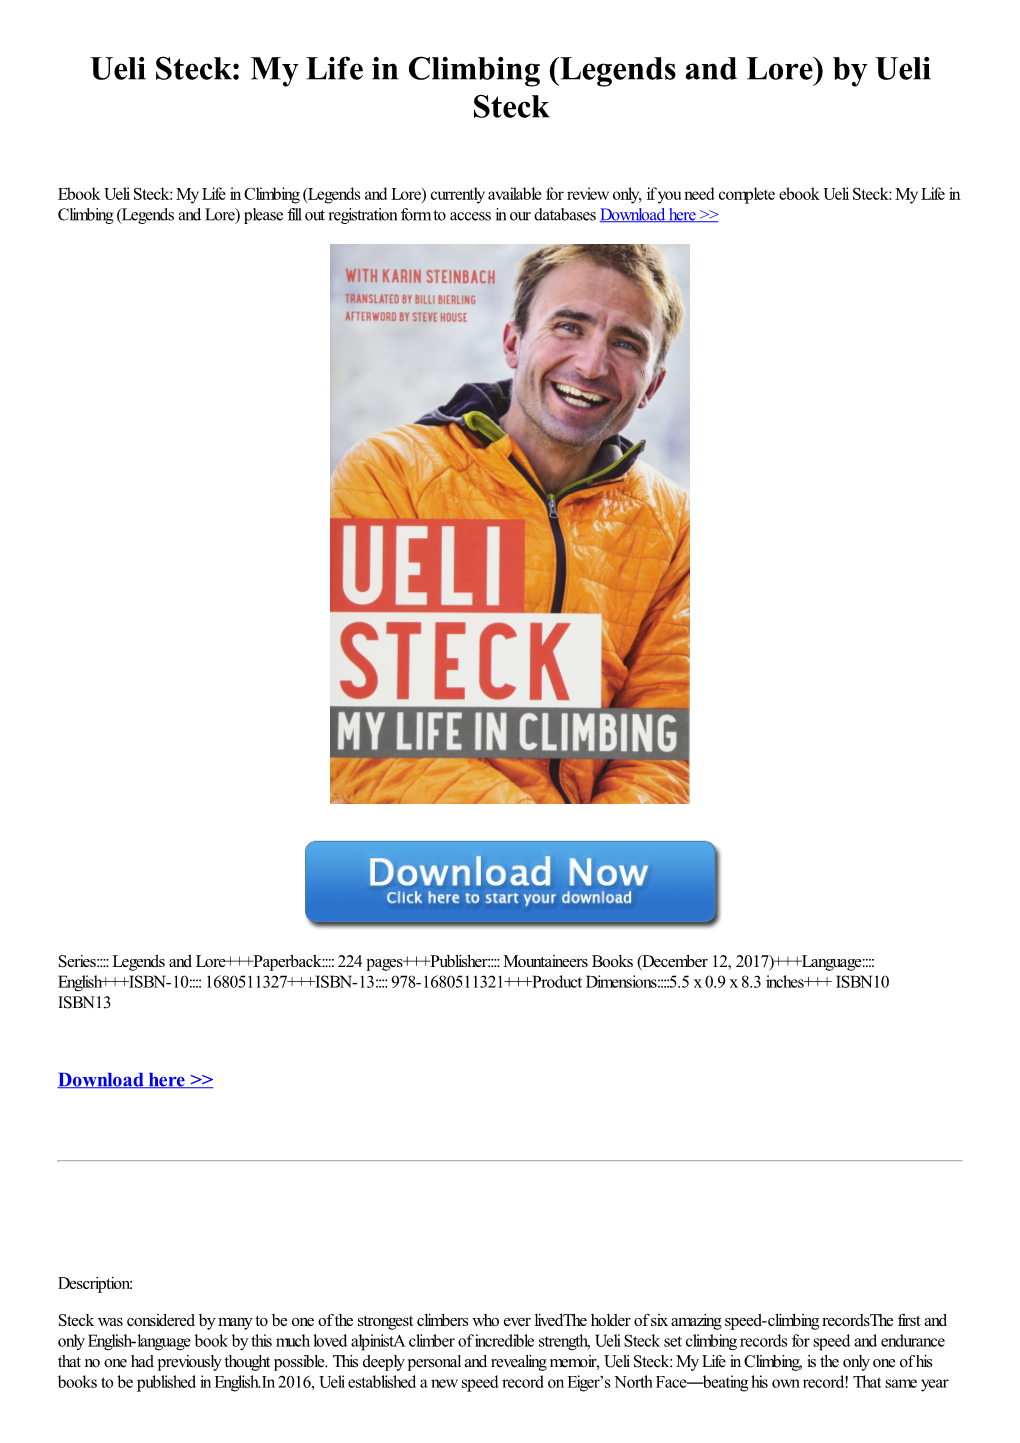 Ueli Steck: My Life in Climbing (Legends and Lore) by Ueli Steck